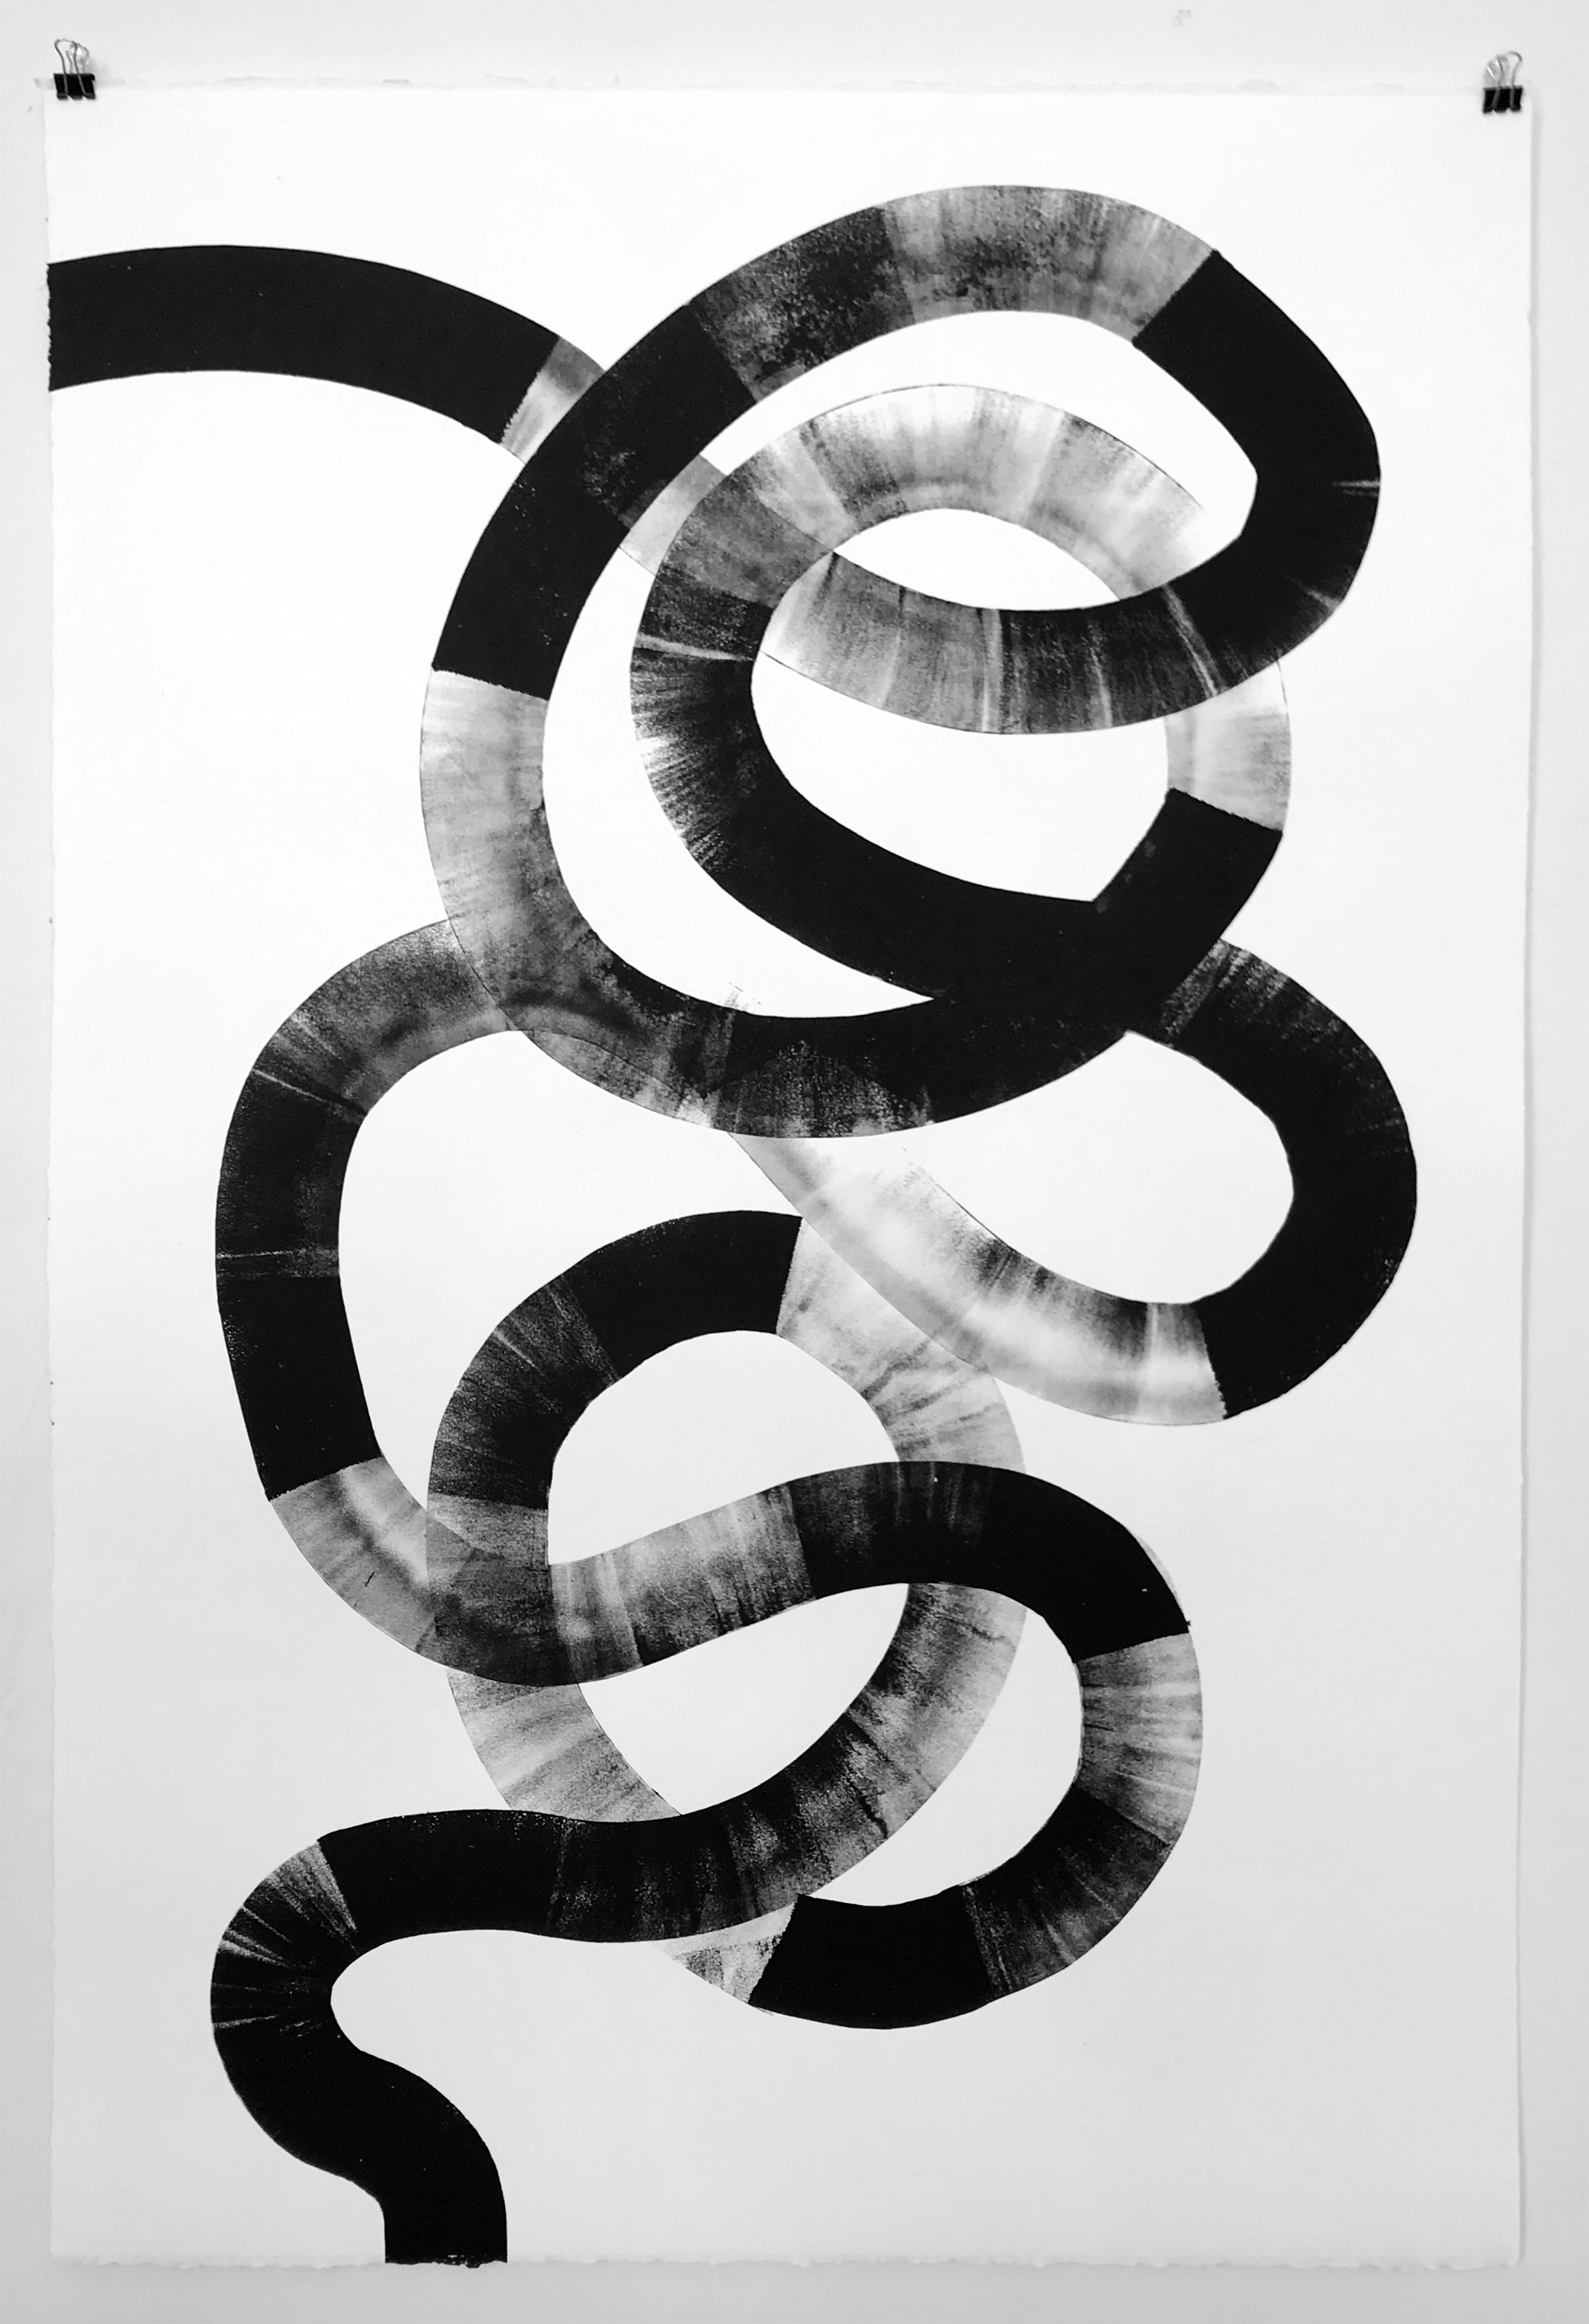  Medusa’s Curl, 2019, Litho ink on canvas, 44 x 30 inches (unframed) 